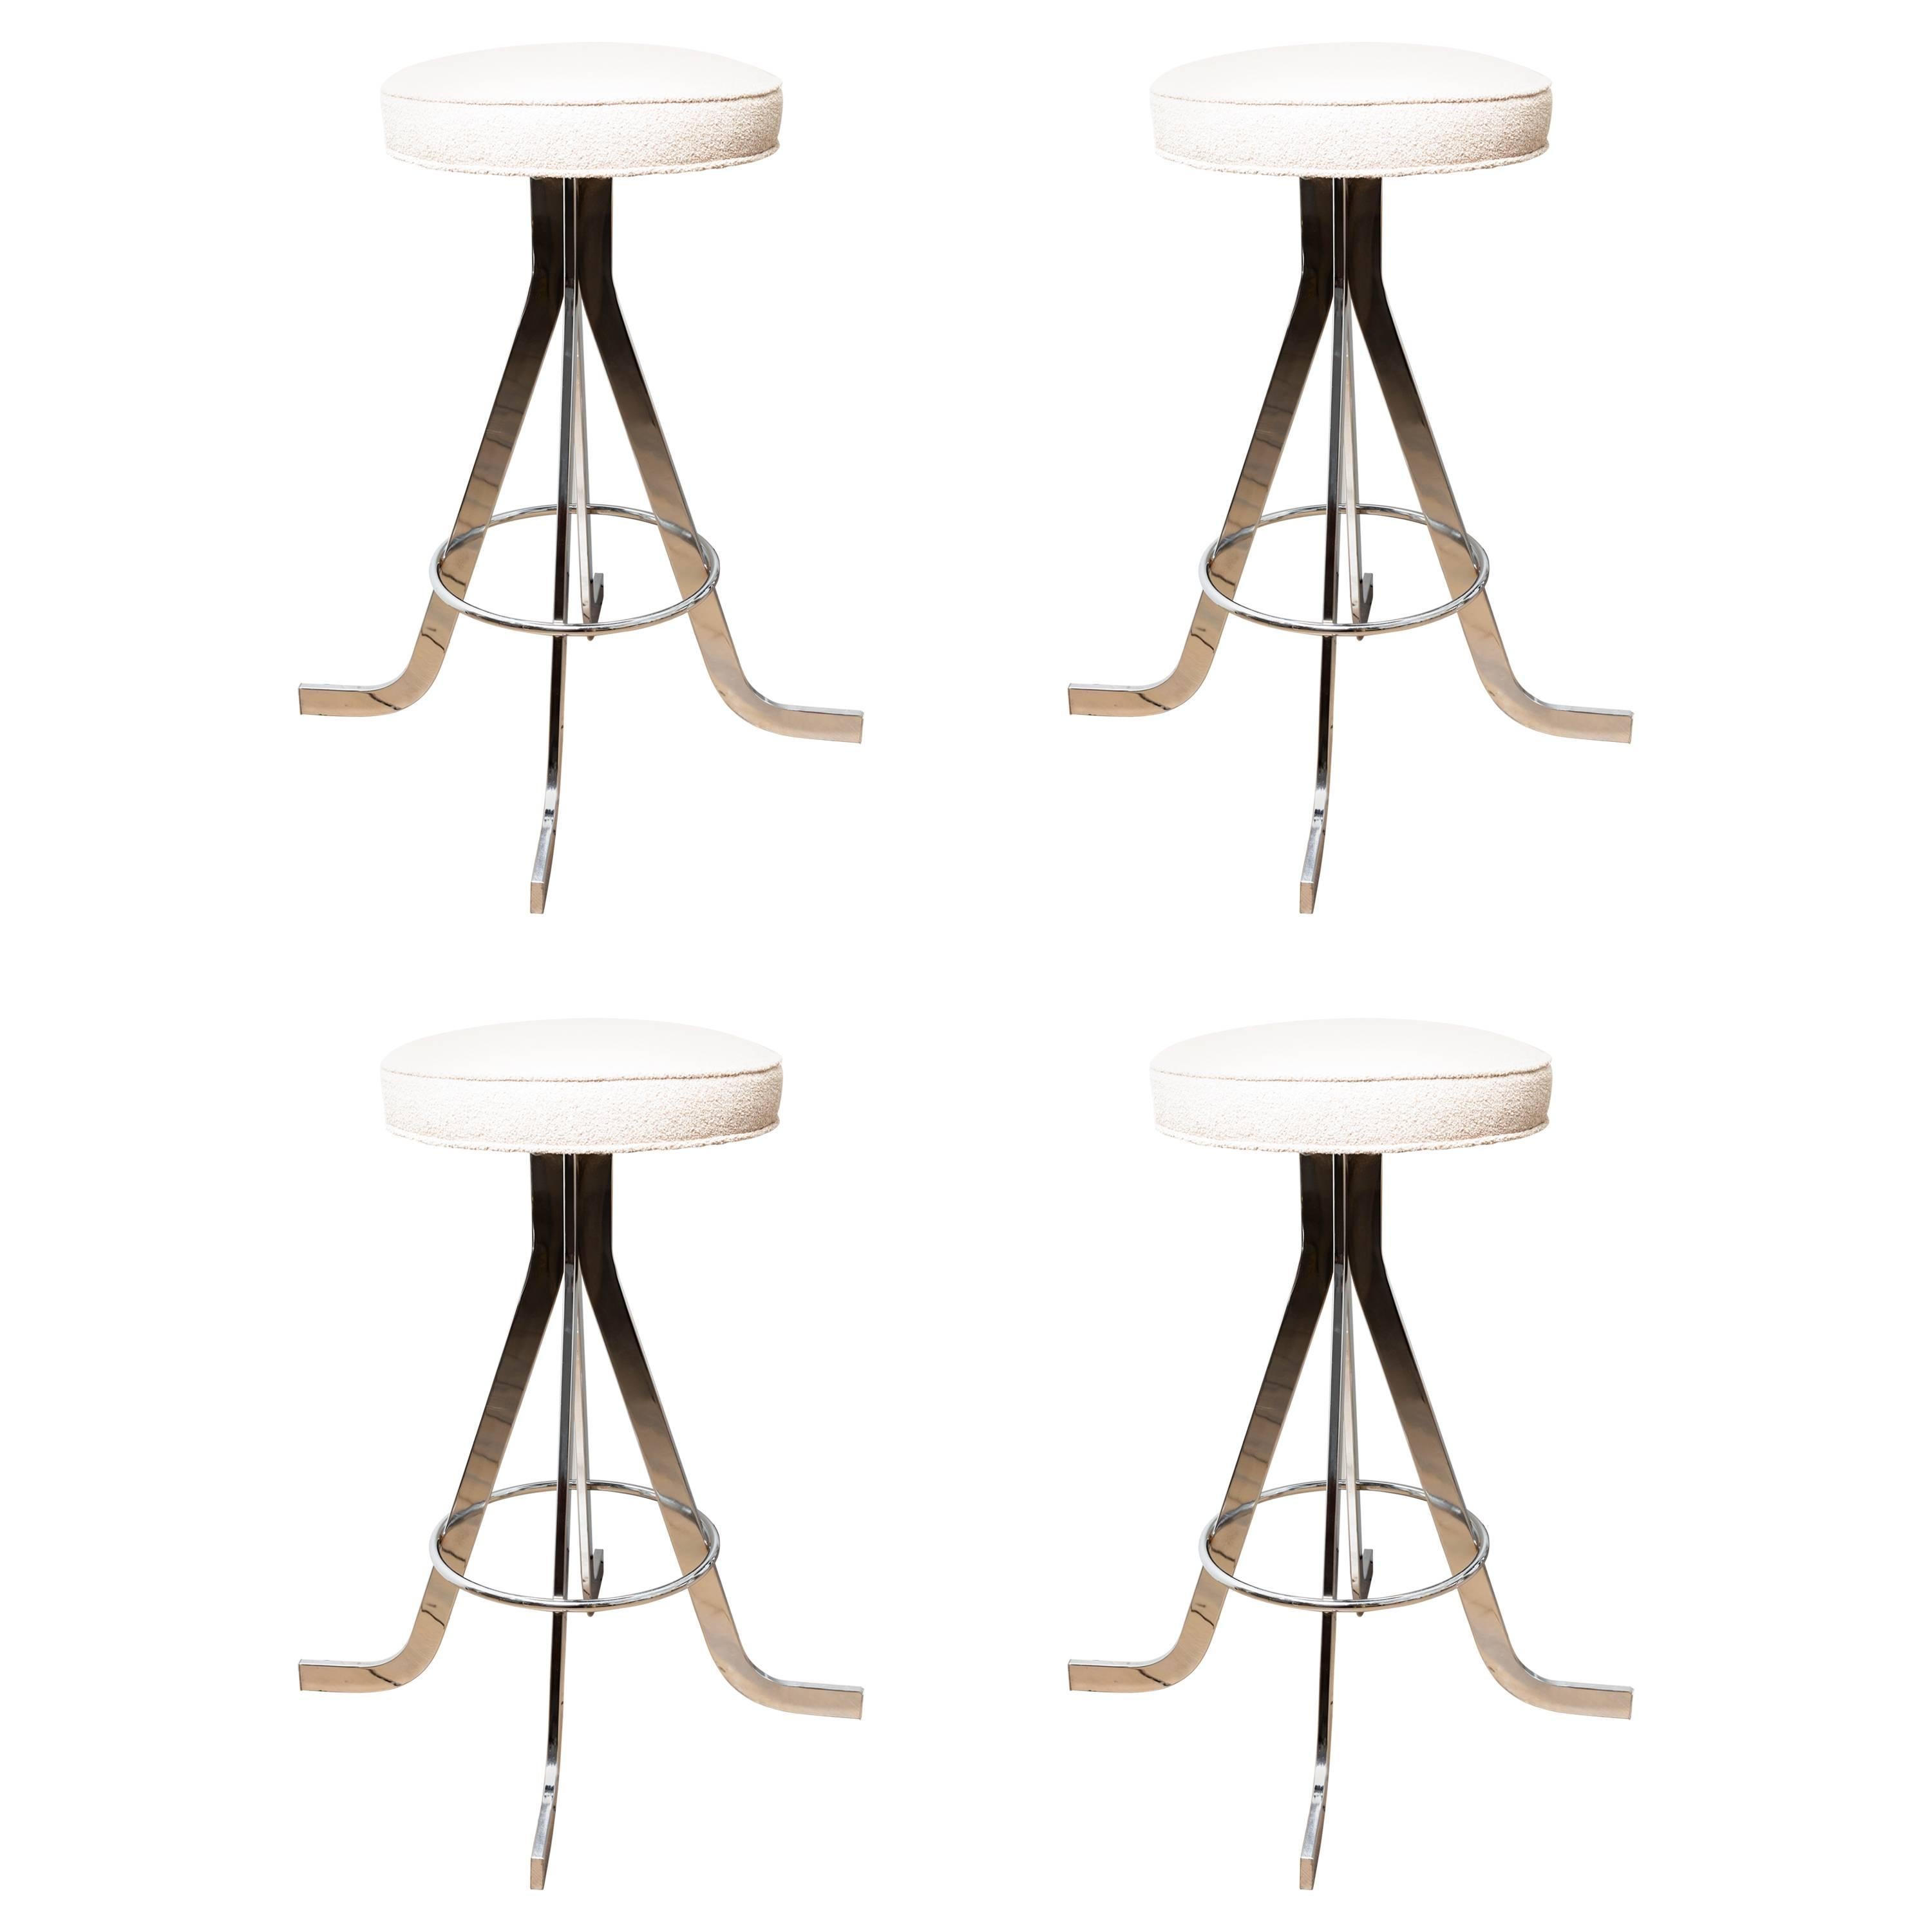 Set of Four Polished Nickel Stools with Upholstered Circular Seats